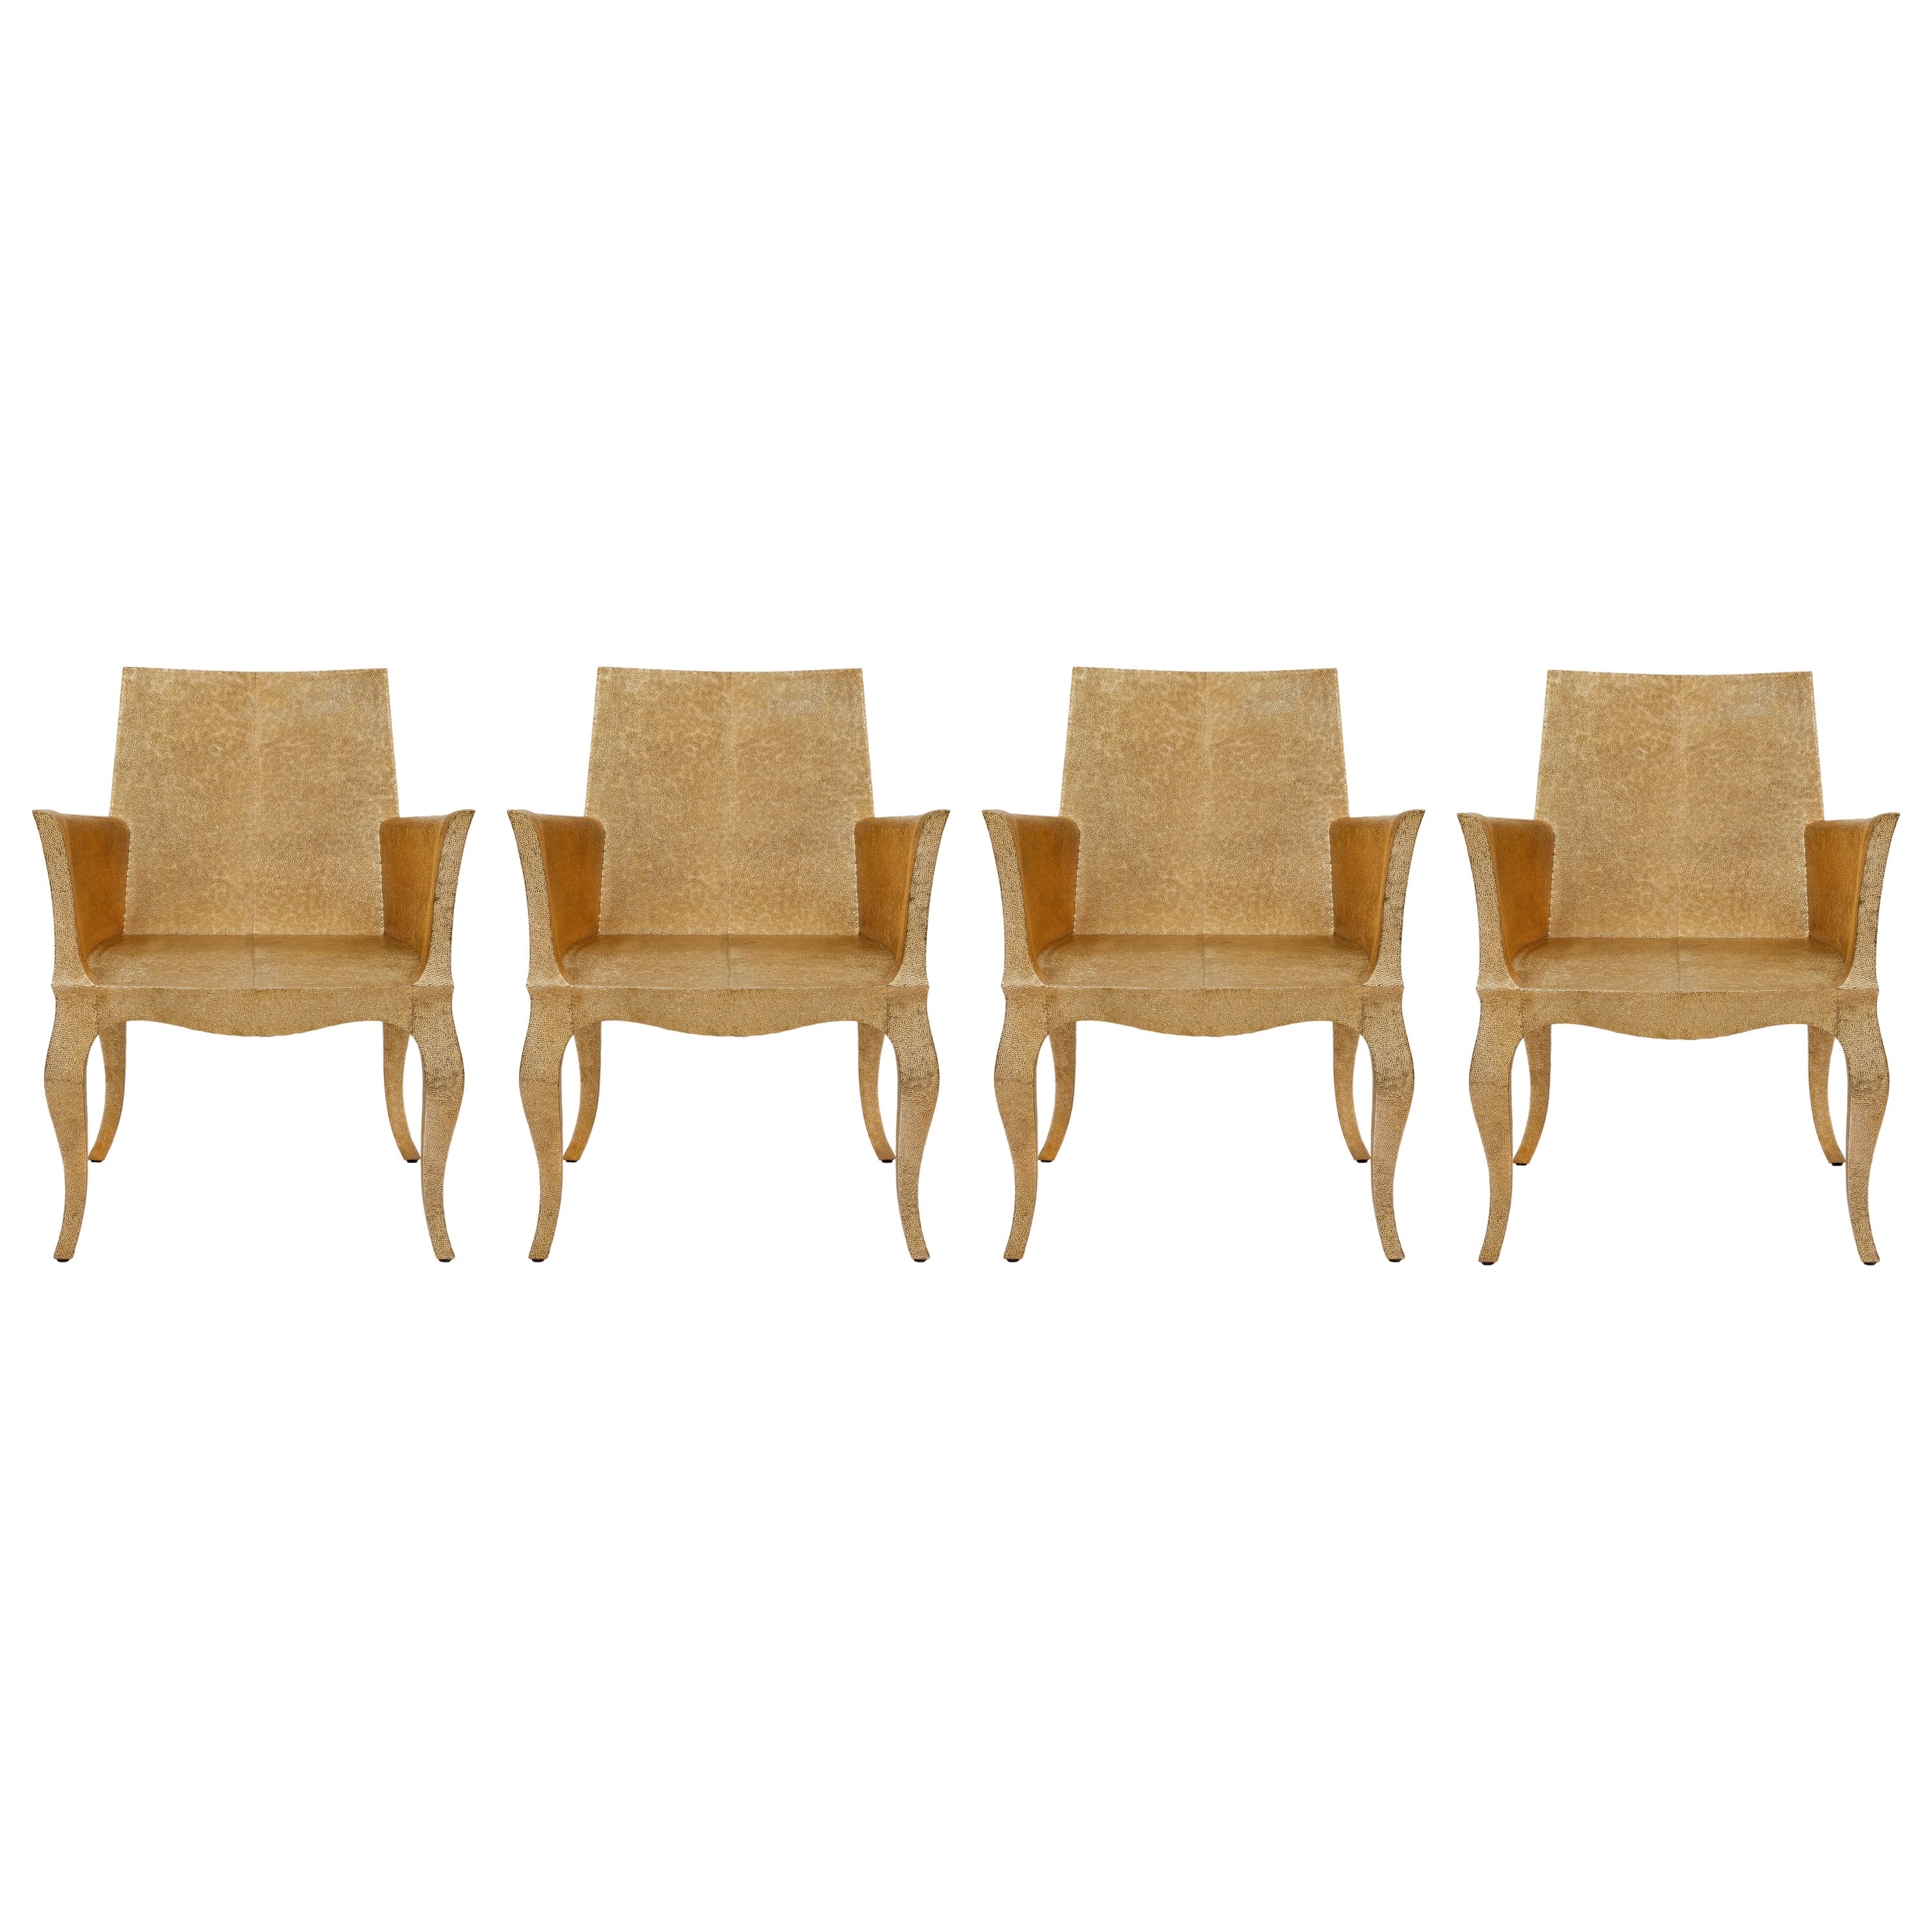 Set of Four Louise Club Chairs in Medium Hammered Brass Over Wood by P. Mathieu For Sale